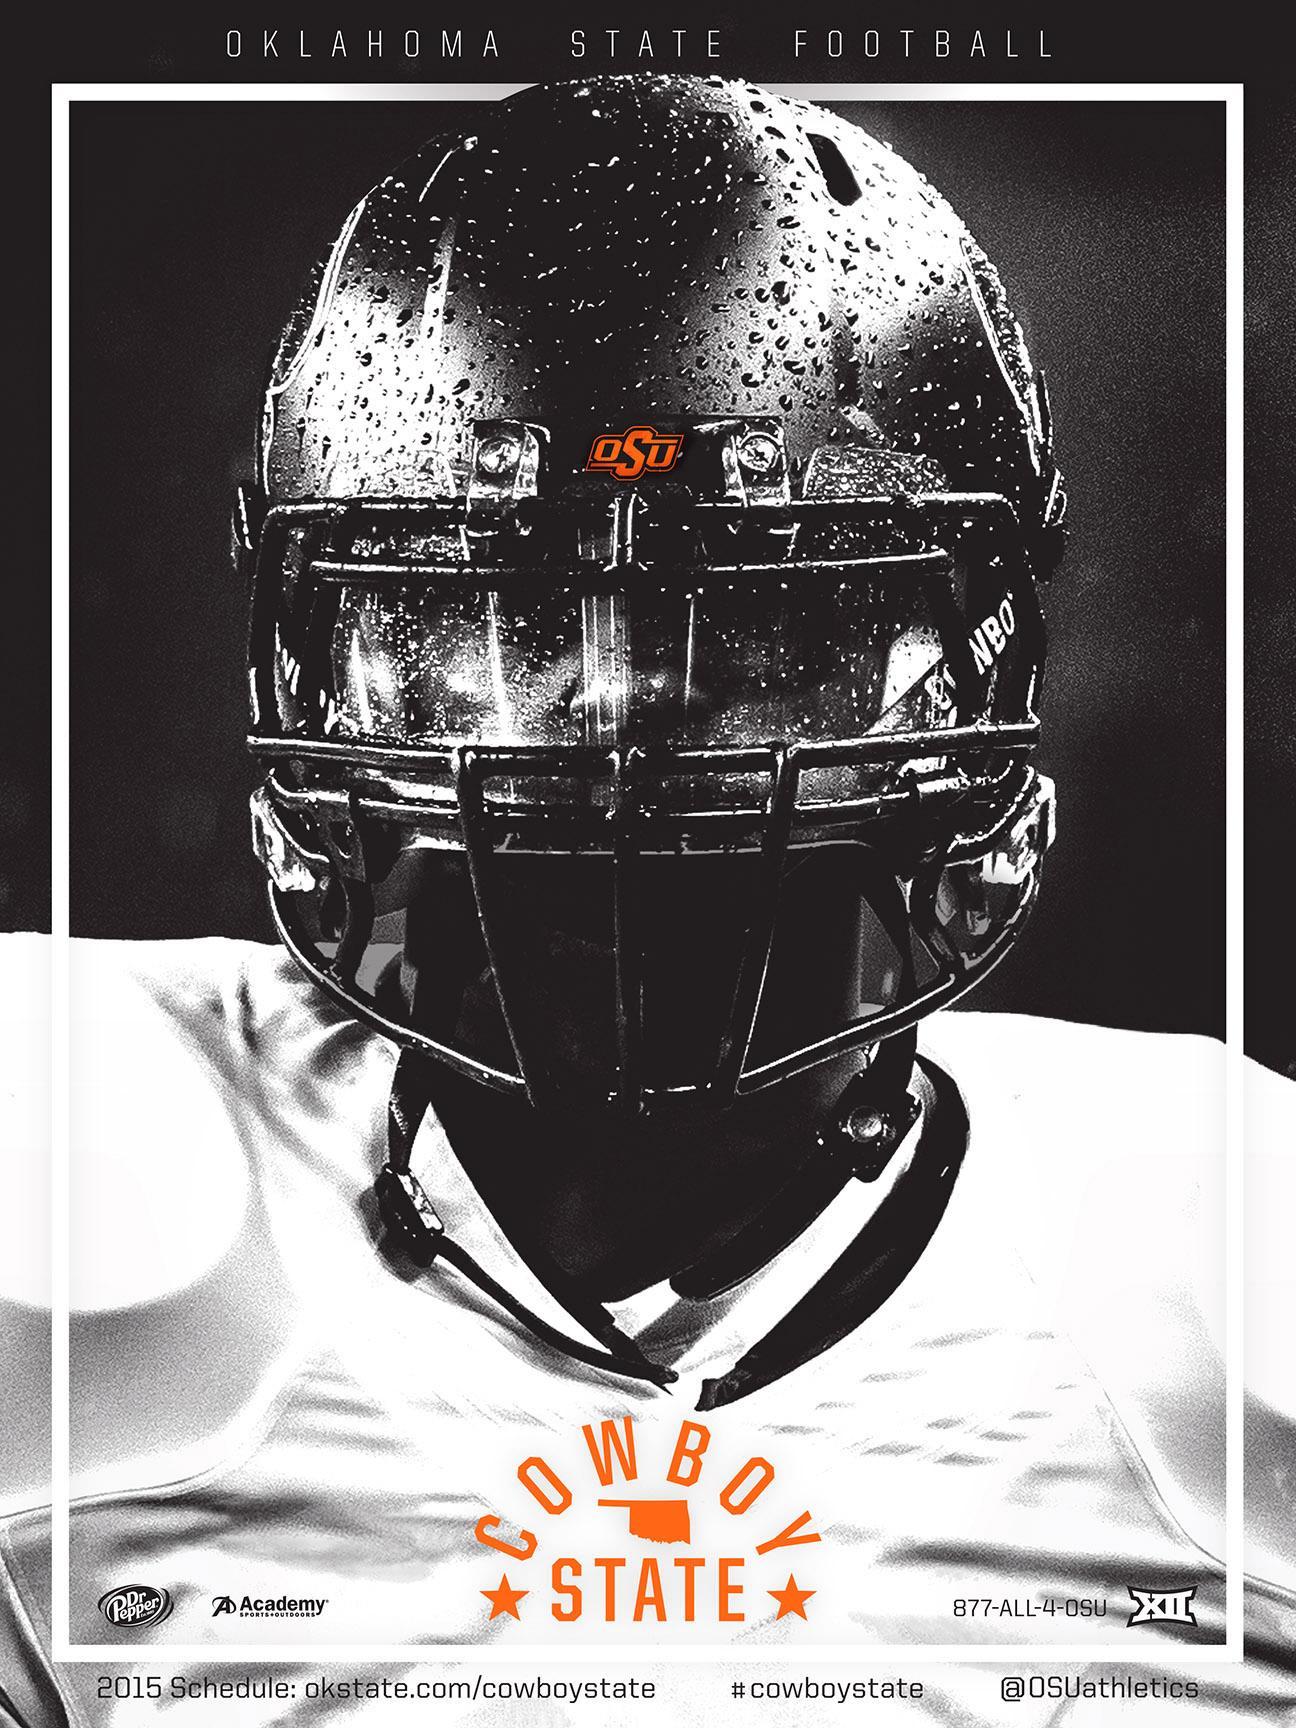 Free download Image Gallery oklahoma state football schedule [1296x1728